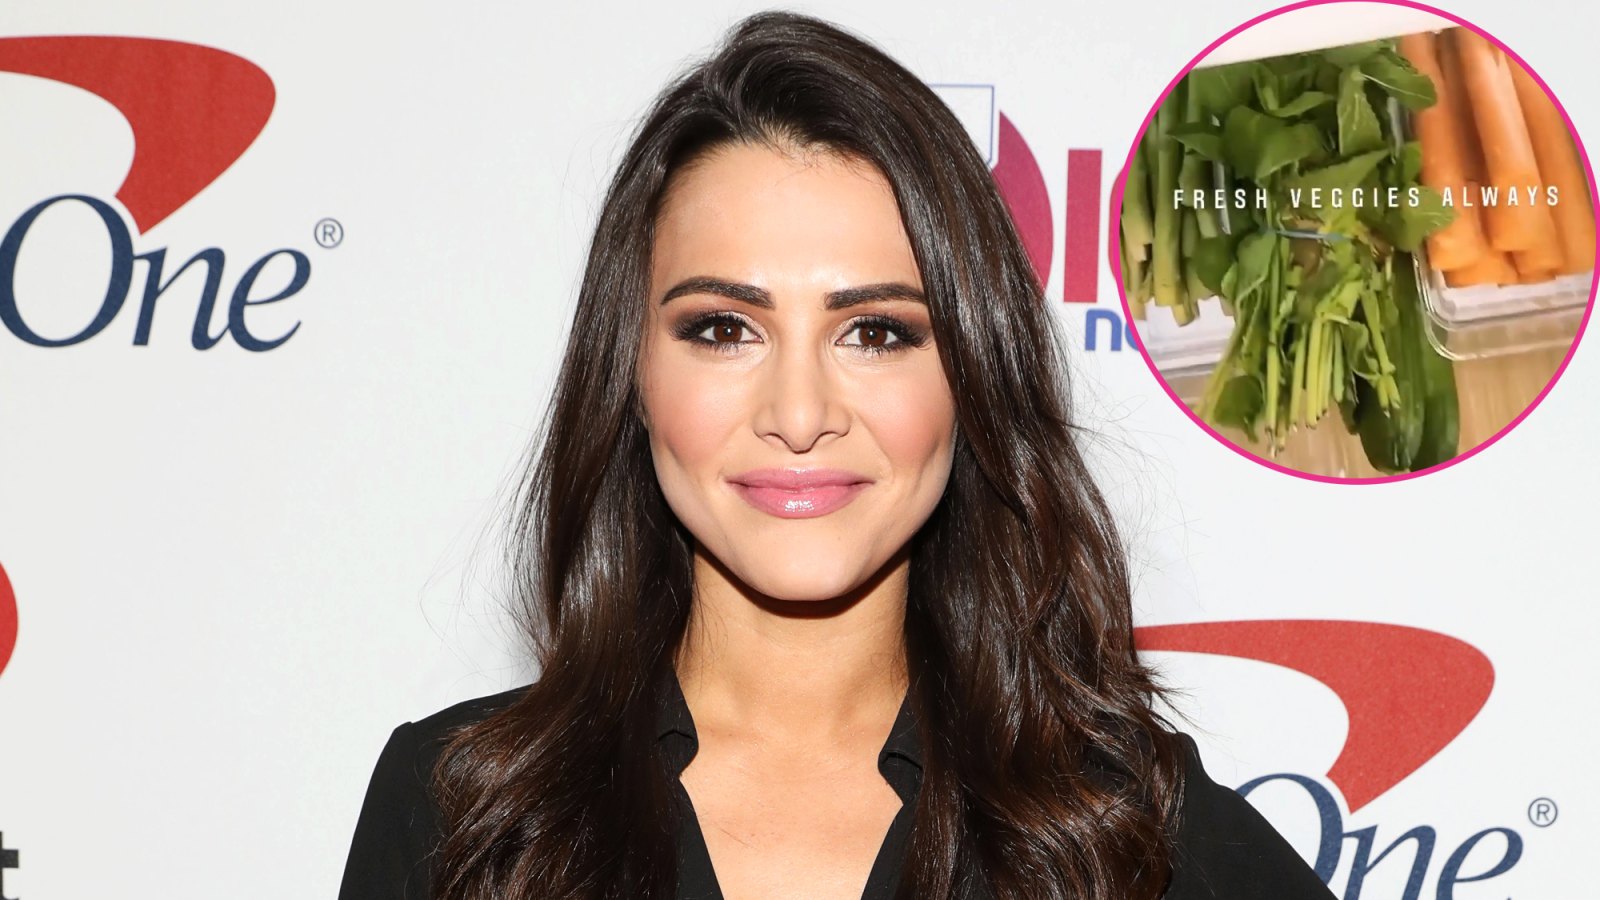 Andi Dorfman Gives a Tour of Her Fridge: ‘Abs Are Made in the Kitchen’